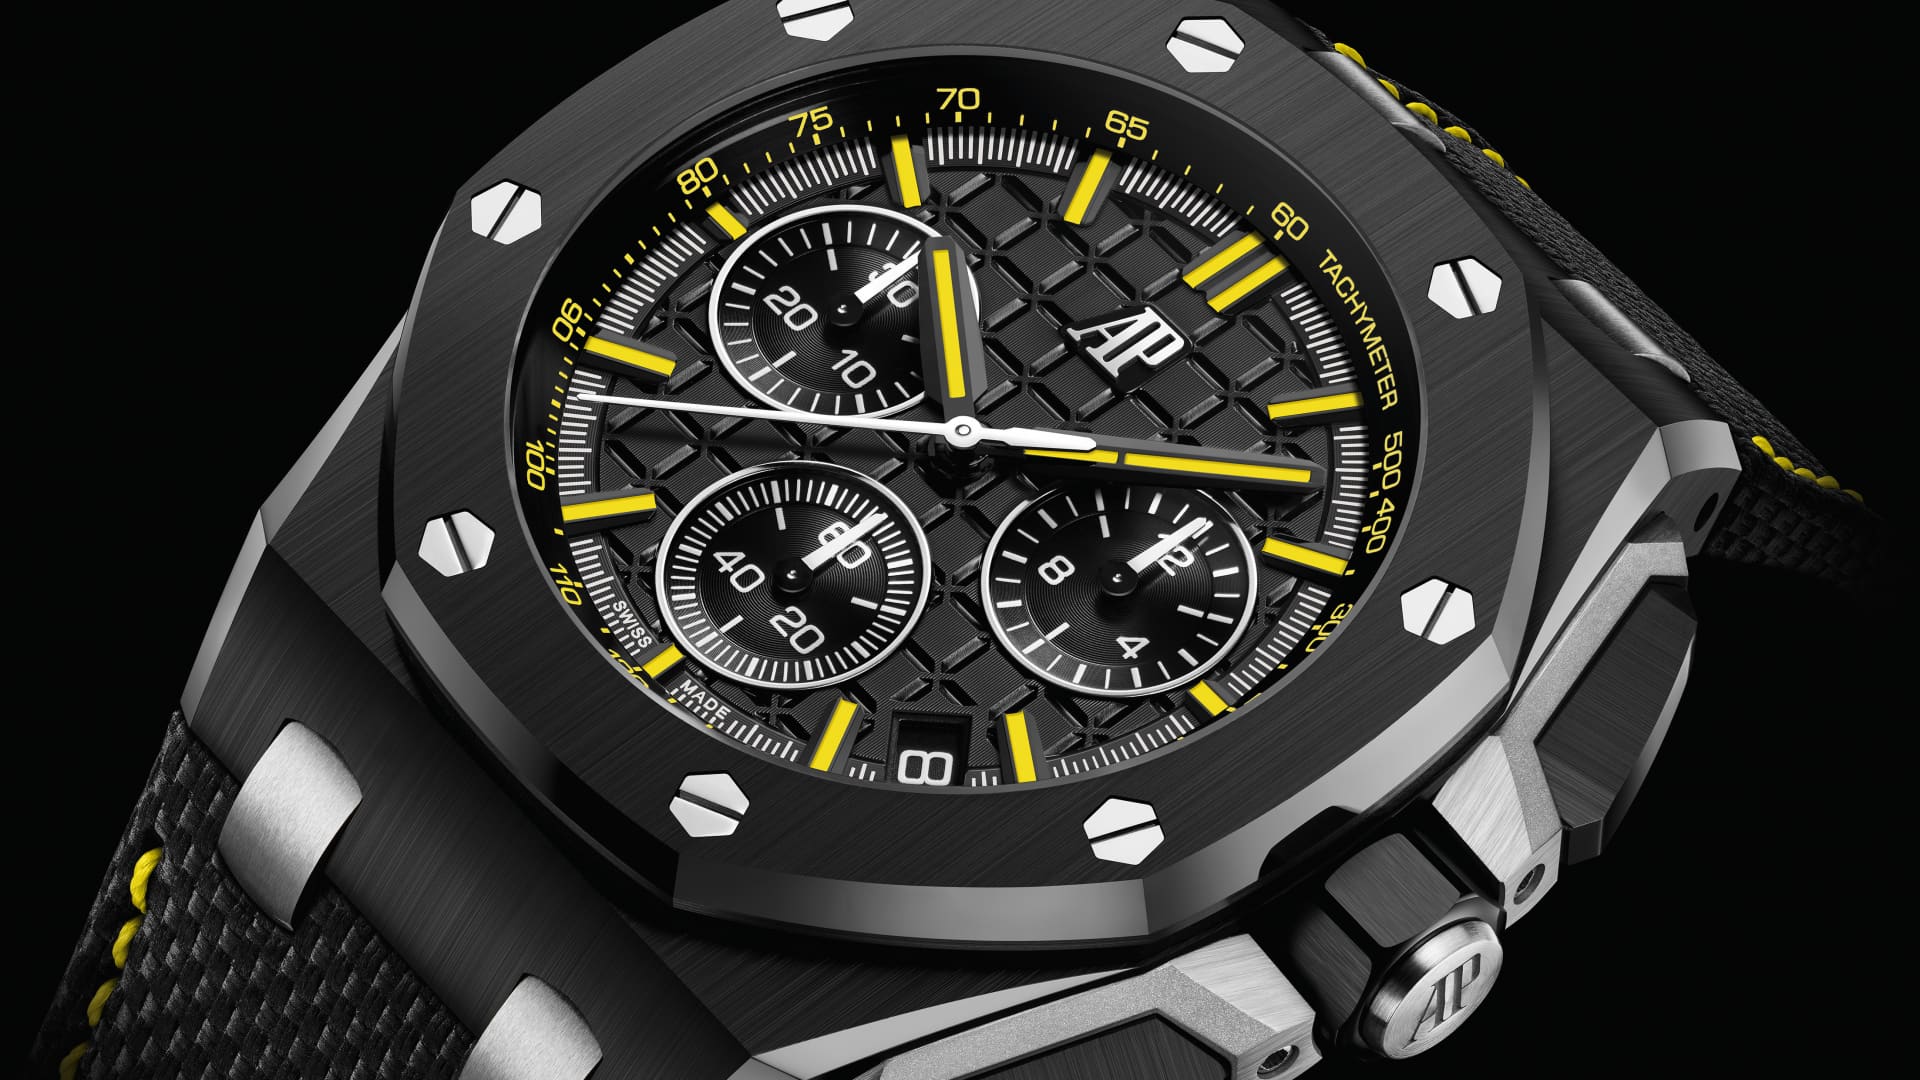 Audemars Piguet's Royal Oak Offshore Selfwinding Chronograph in black ceramic, celebrating the 30th anniversary of the collection.